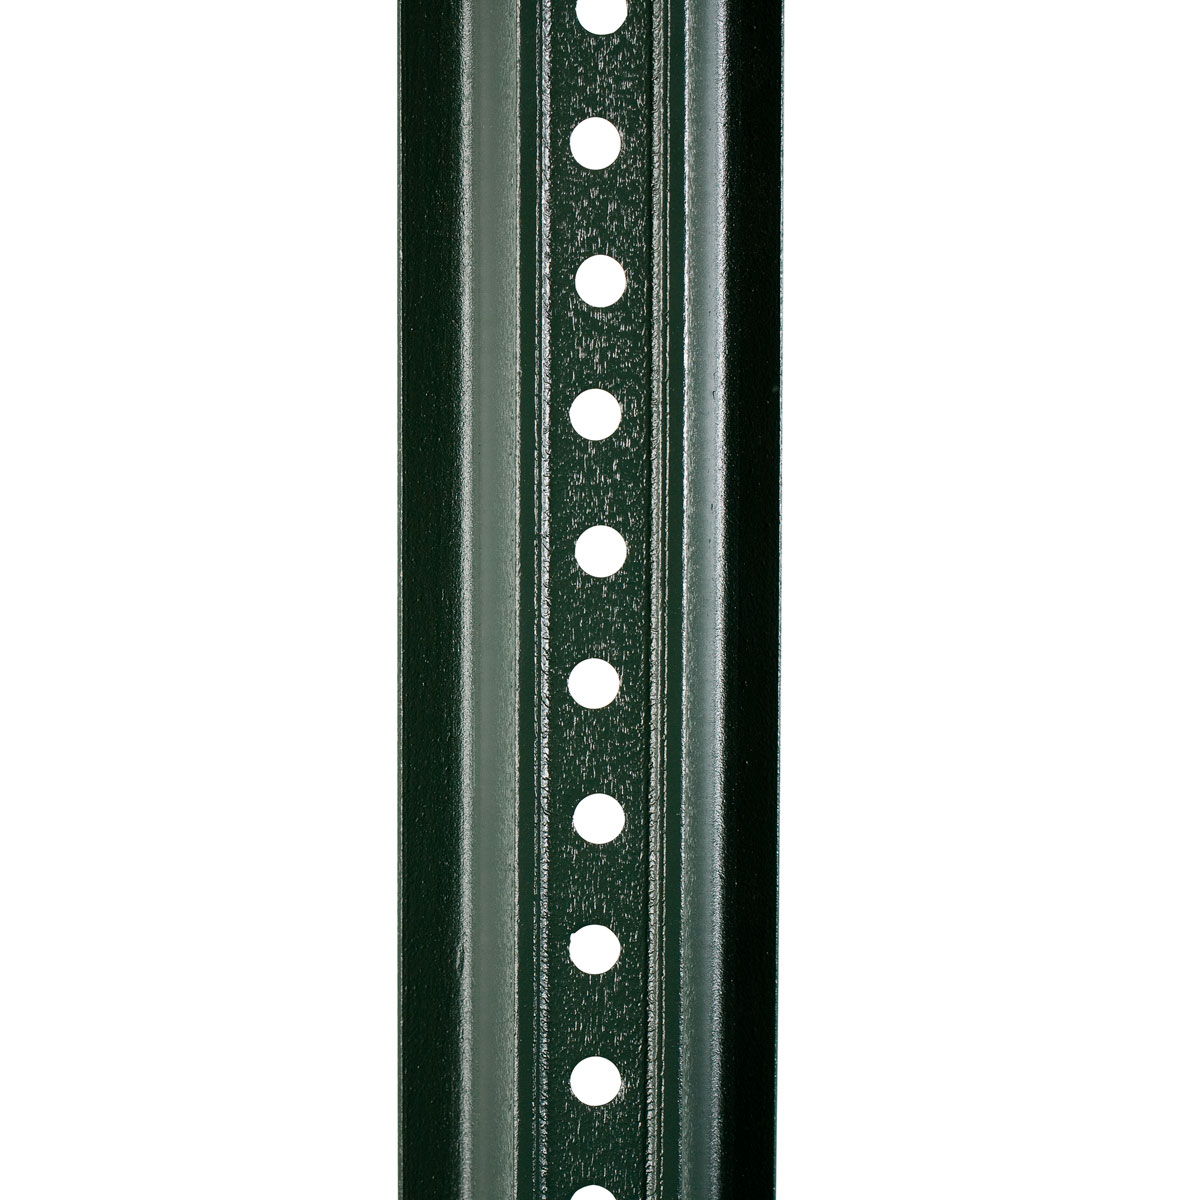 Green Color U-Channel Sign Posts Brady 95047 6 Length High-Tensile Strength Steel Baked Green Enamel on Hot-Rolled